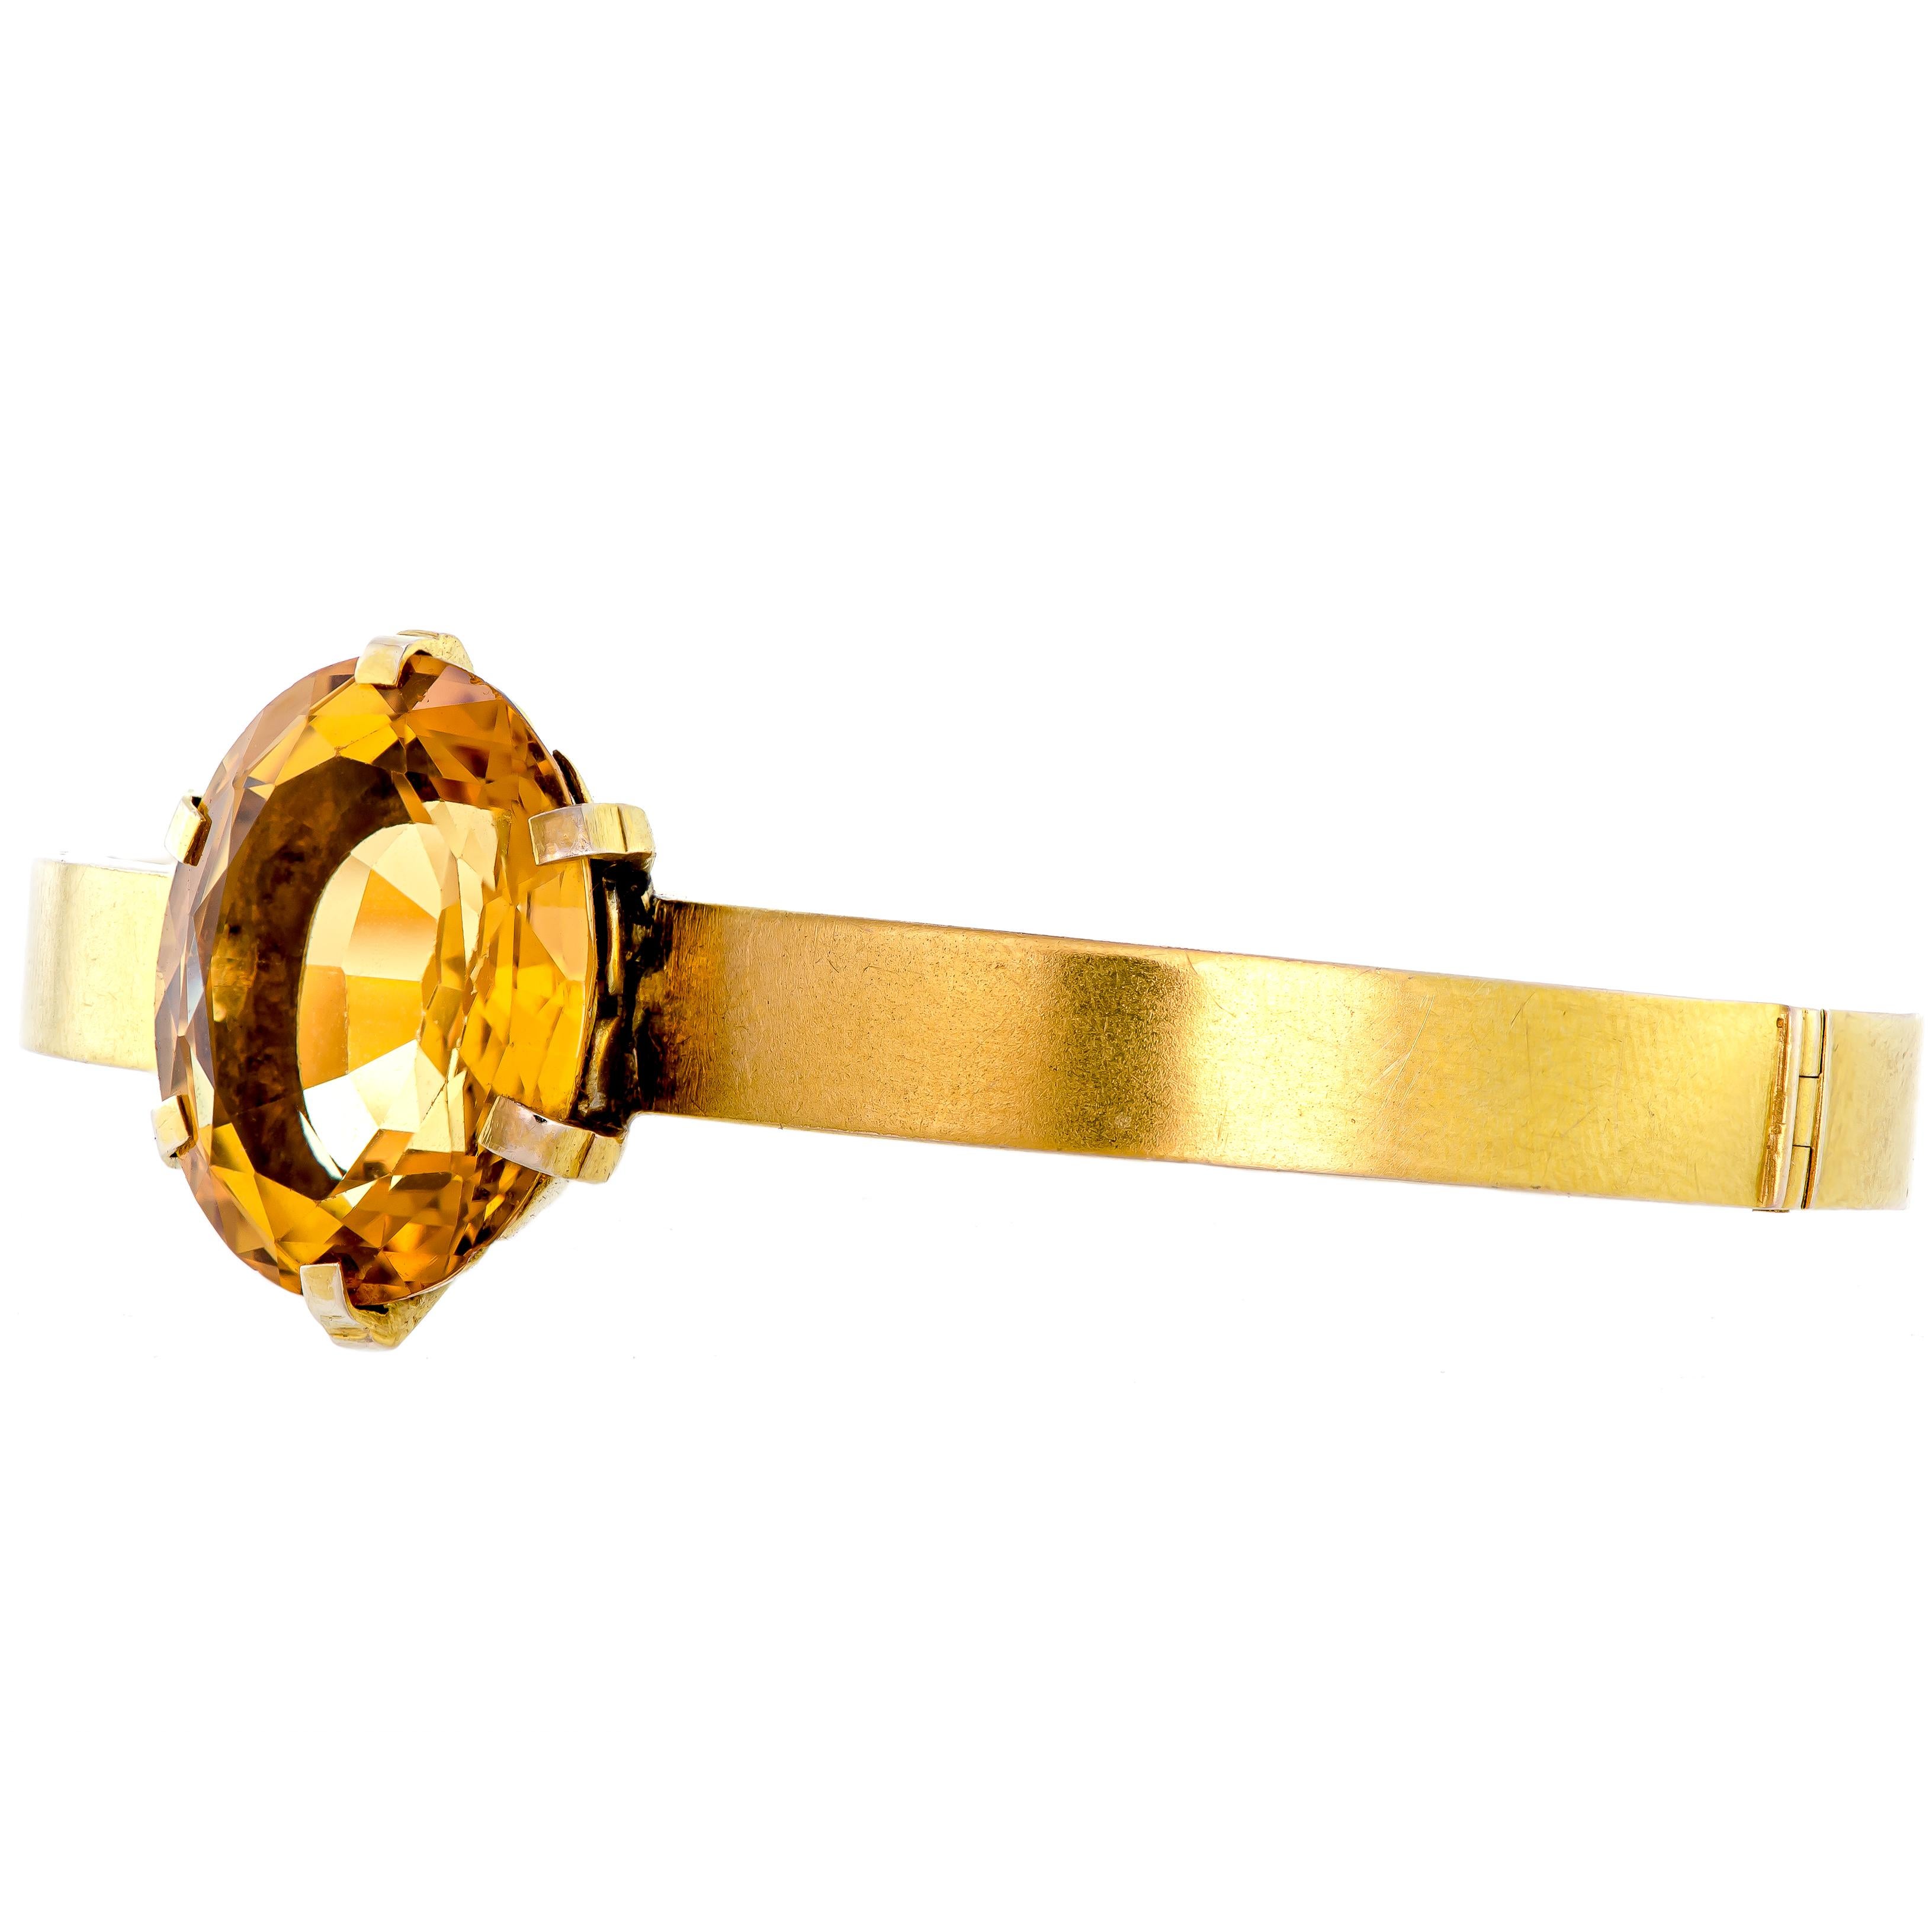 This striking sizeable faceted oval cut citrine bracelet is unique. This stiff-hinged bracelet is crafted out of 14kt yellow gold. It features one faceted oval cut citrine that measures 20.4 x 15.5 x 9.6mm (approximate) with an estimated weight of